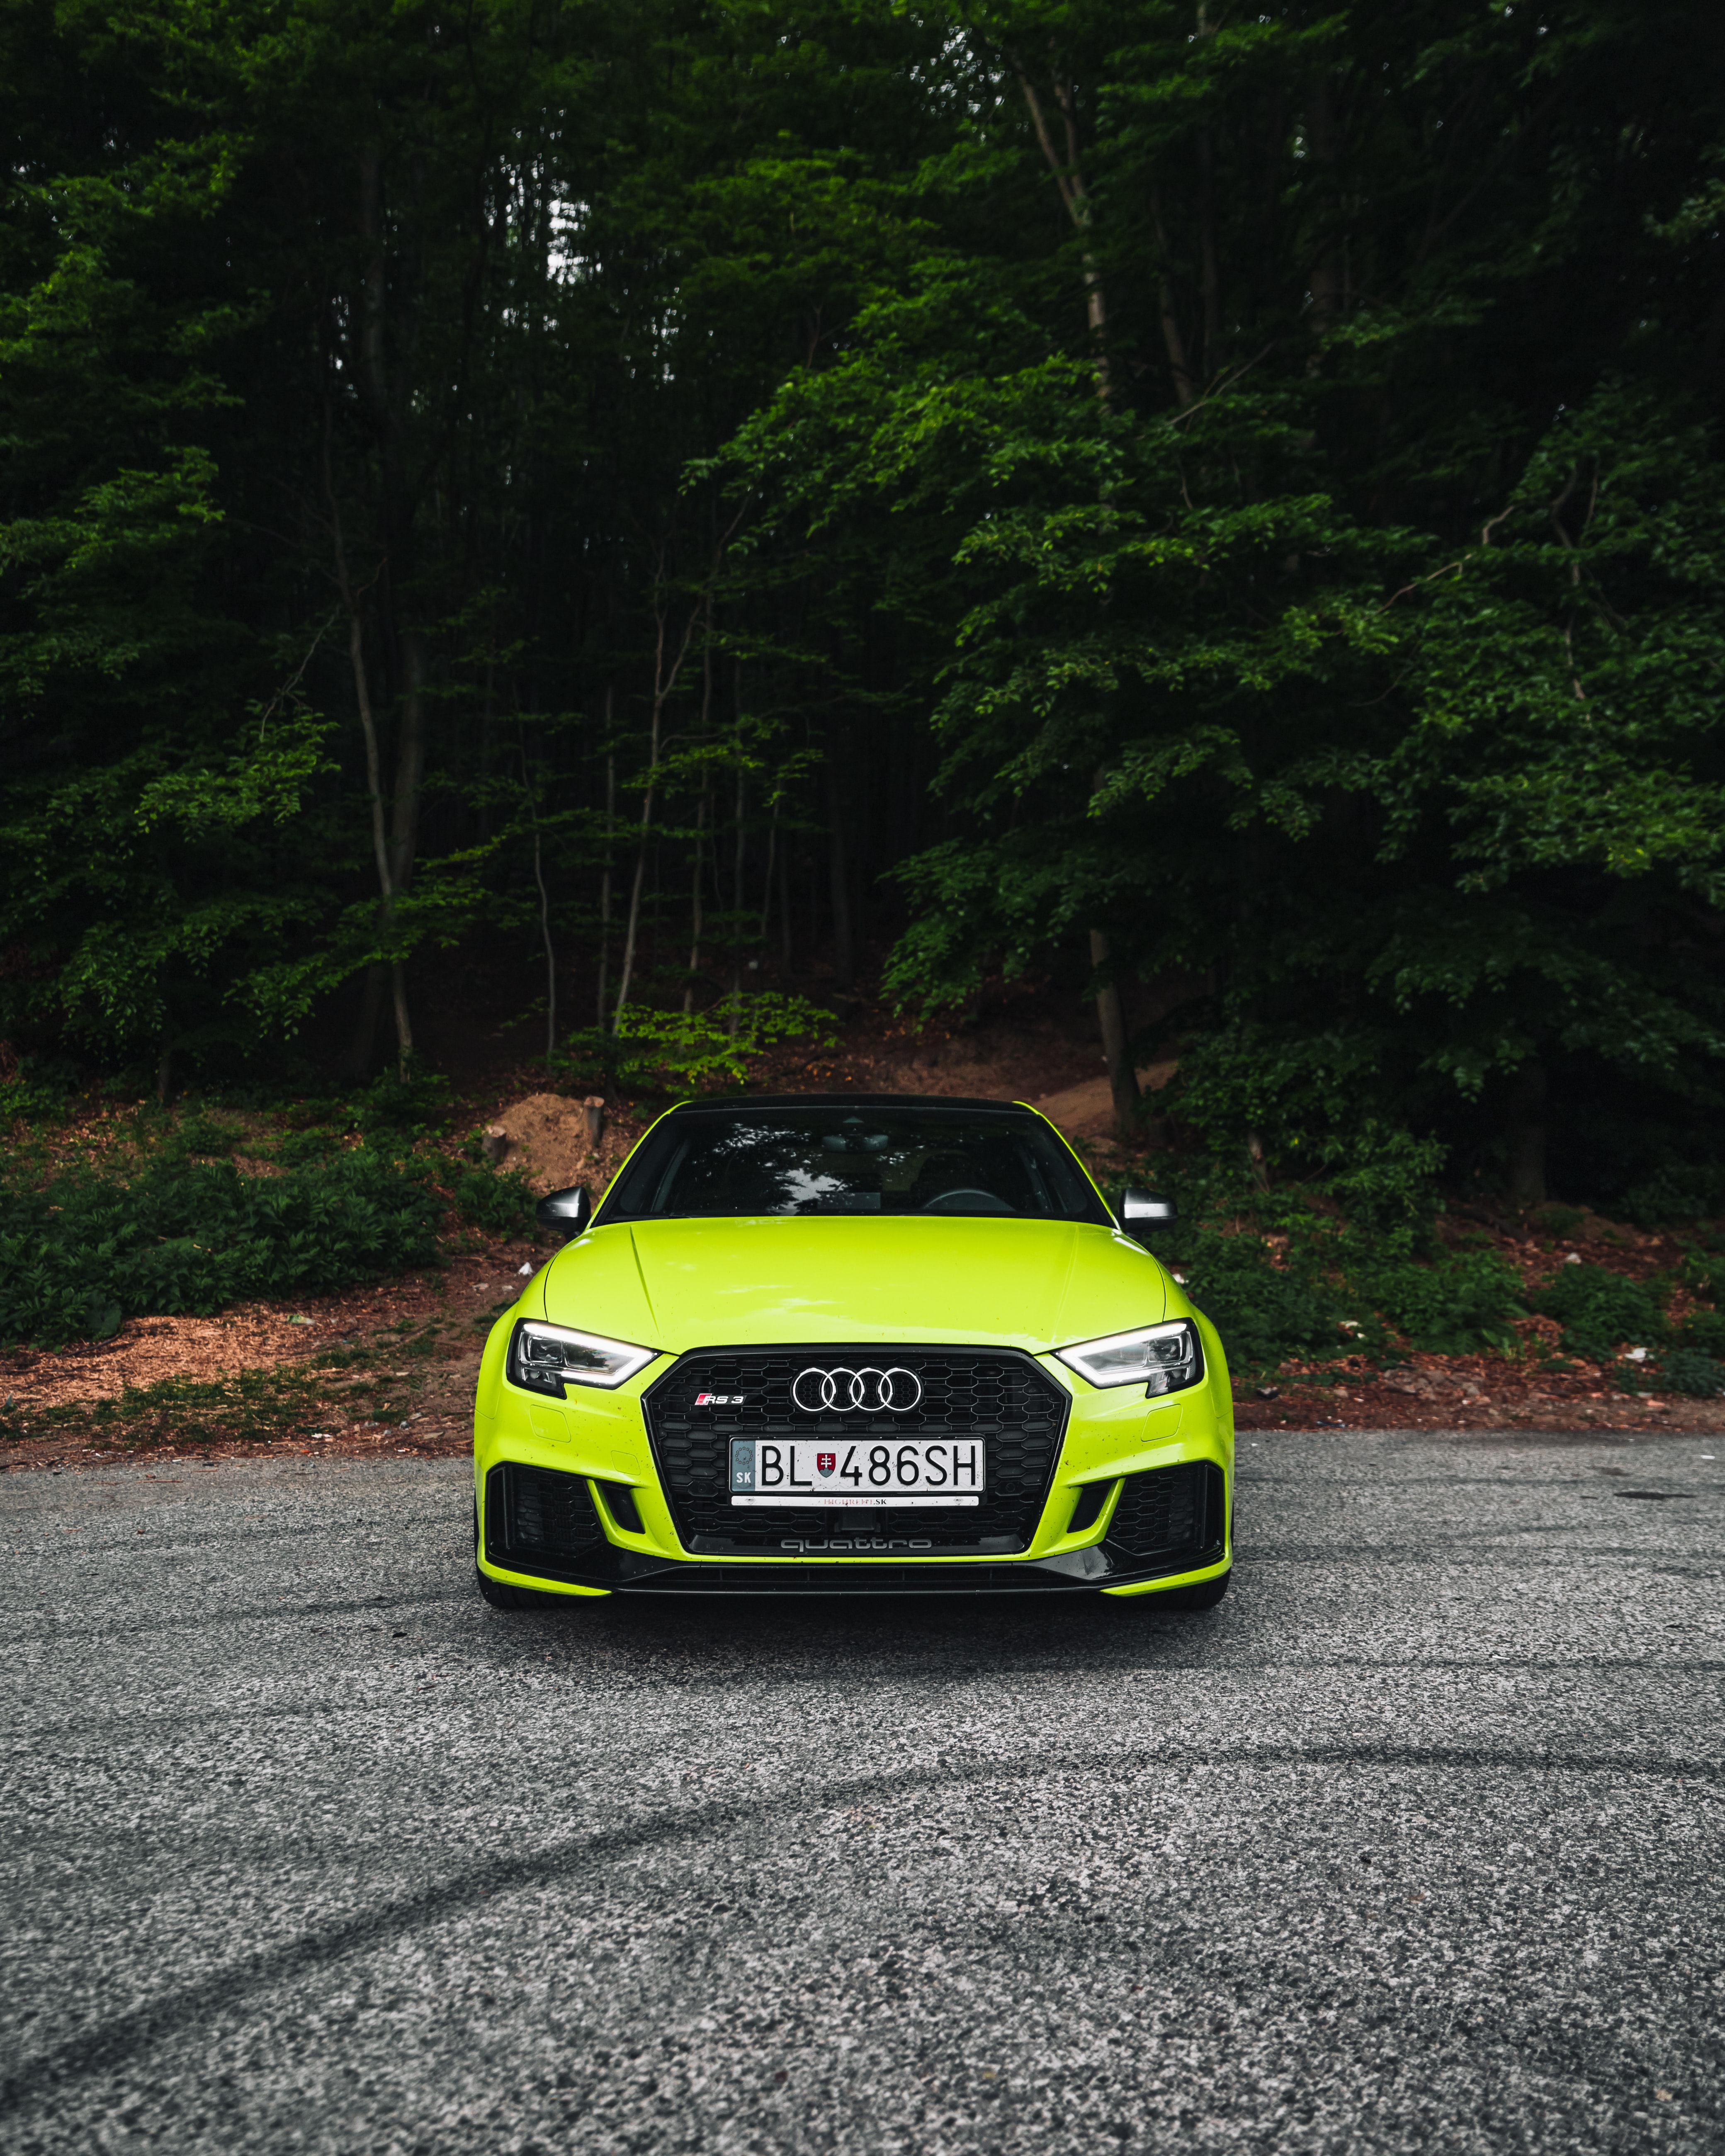 audi, cars, sports car, front view, sports, green, car, audi rs4